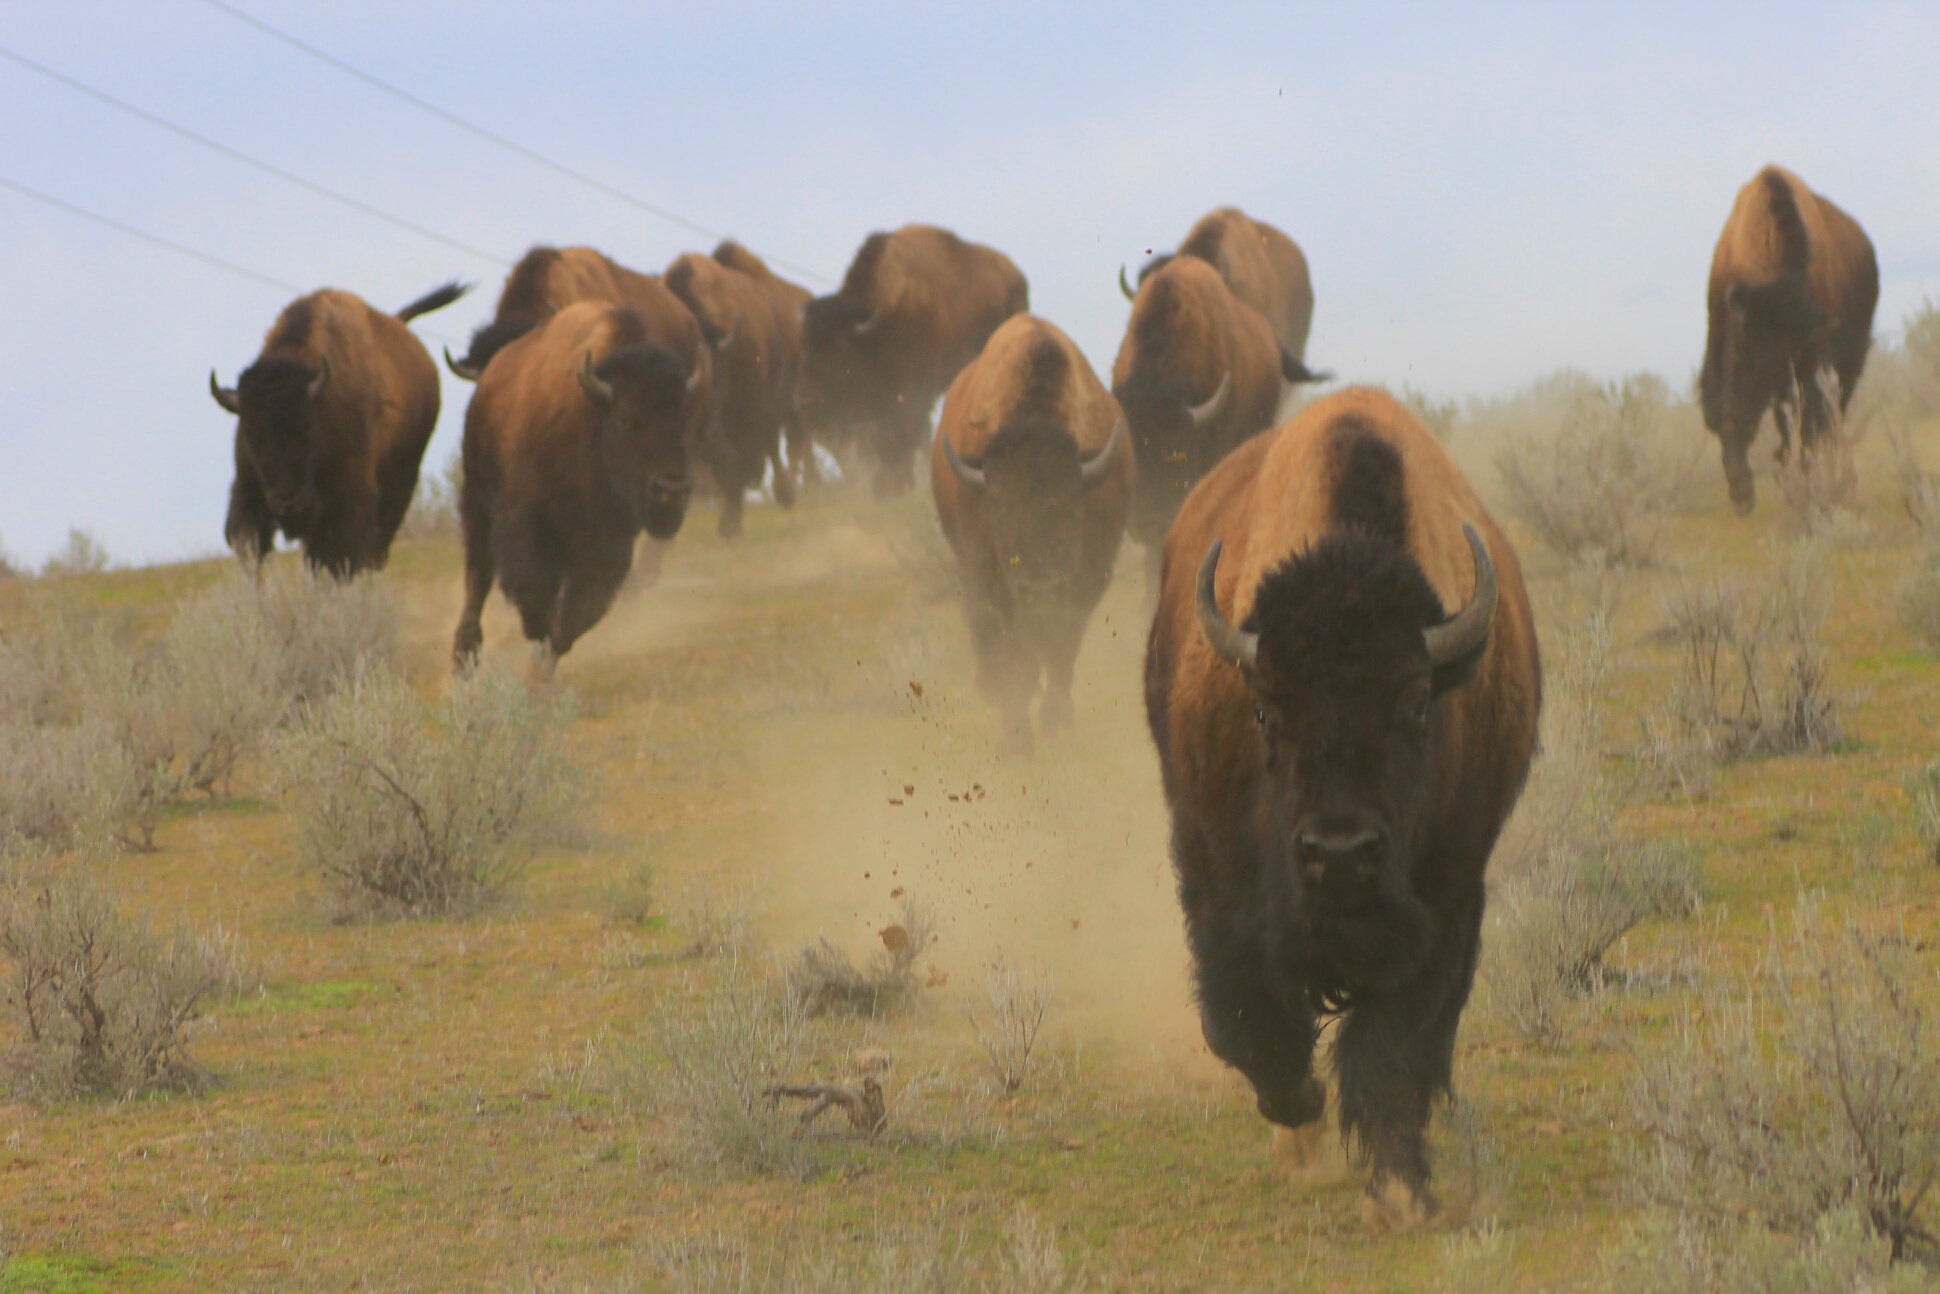 Reporter's Reaction to Bison Herd Becomes Meme